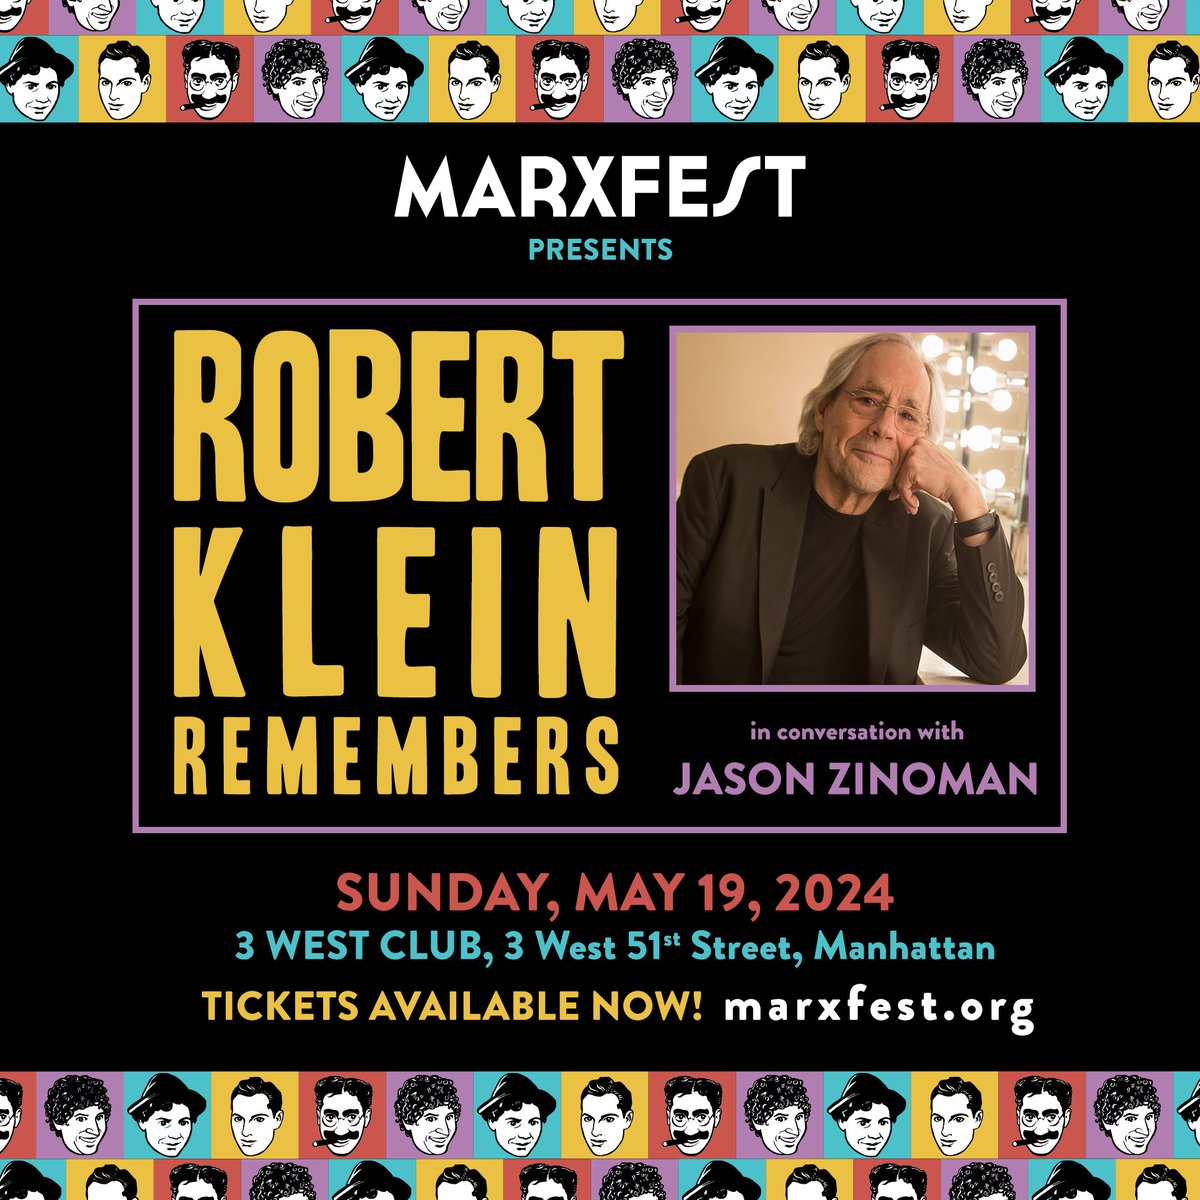 ROBERT KLEIN REMEMBERS! The comedy legend in conversation with @zinoman. Tickets available now at marxfest.org. Included in these ticket packages: ⭐️ Both-Weekend Almost Everything ⭐️ Manhattan Weekend ⭐️ Friday and Sunday Manhattan ⭐️ Sunday Manhattan Ballroom